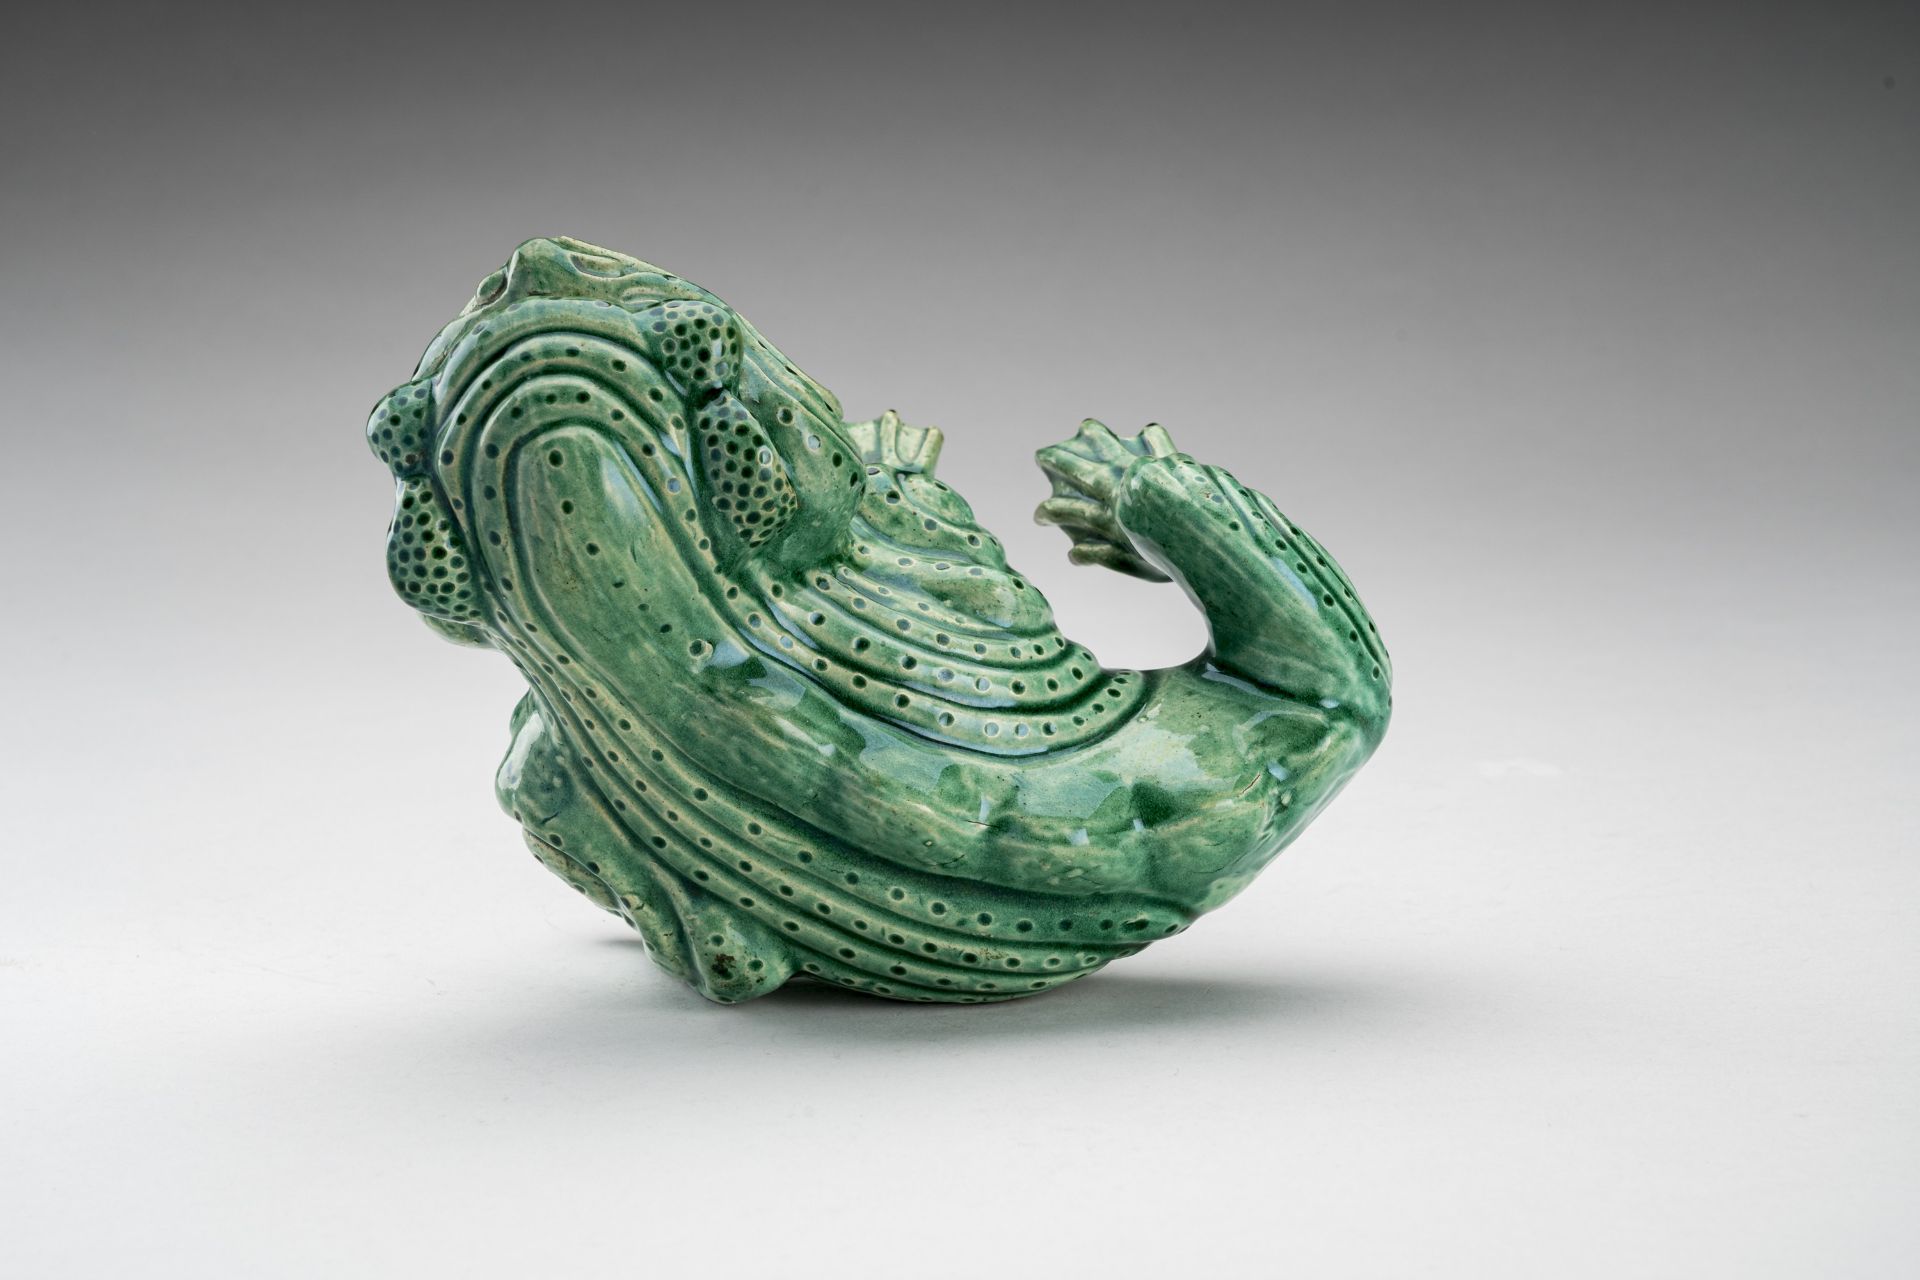 A RARE GREEN GLAZED POTTERY FIGURE OF THE THREE-LEGED TOAD - Image 8 of 9